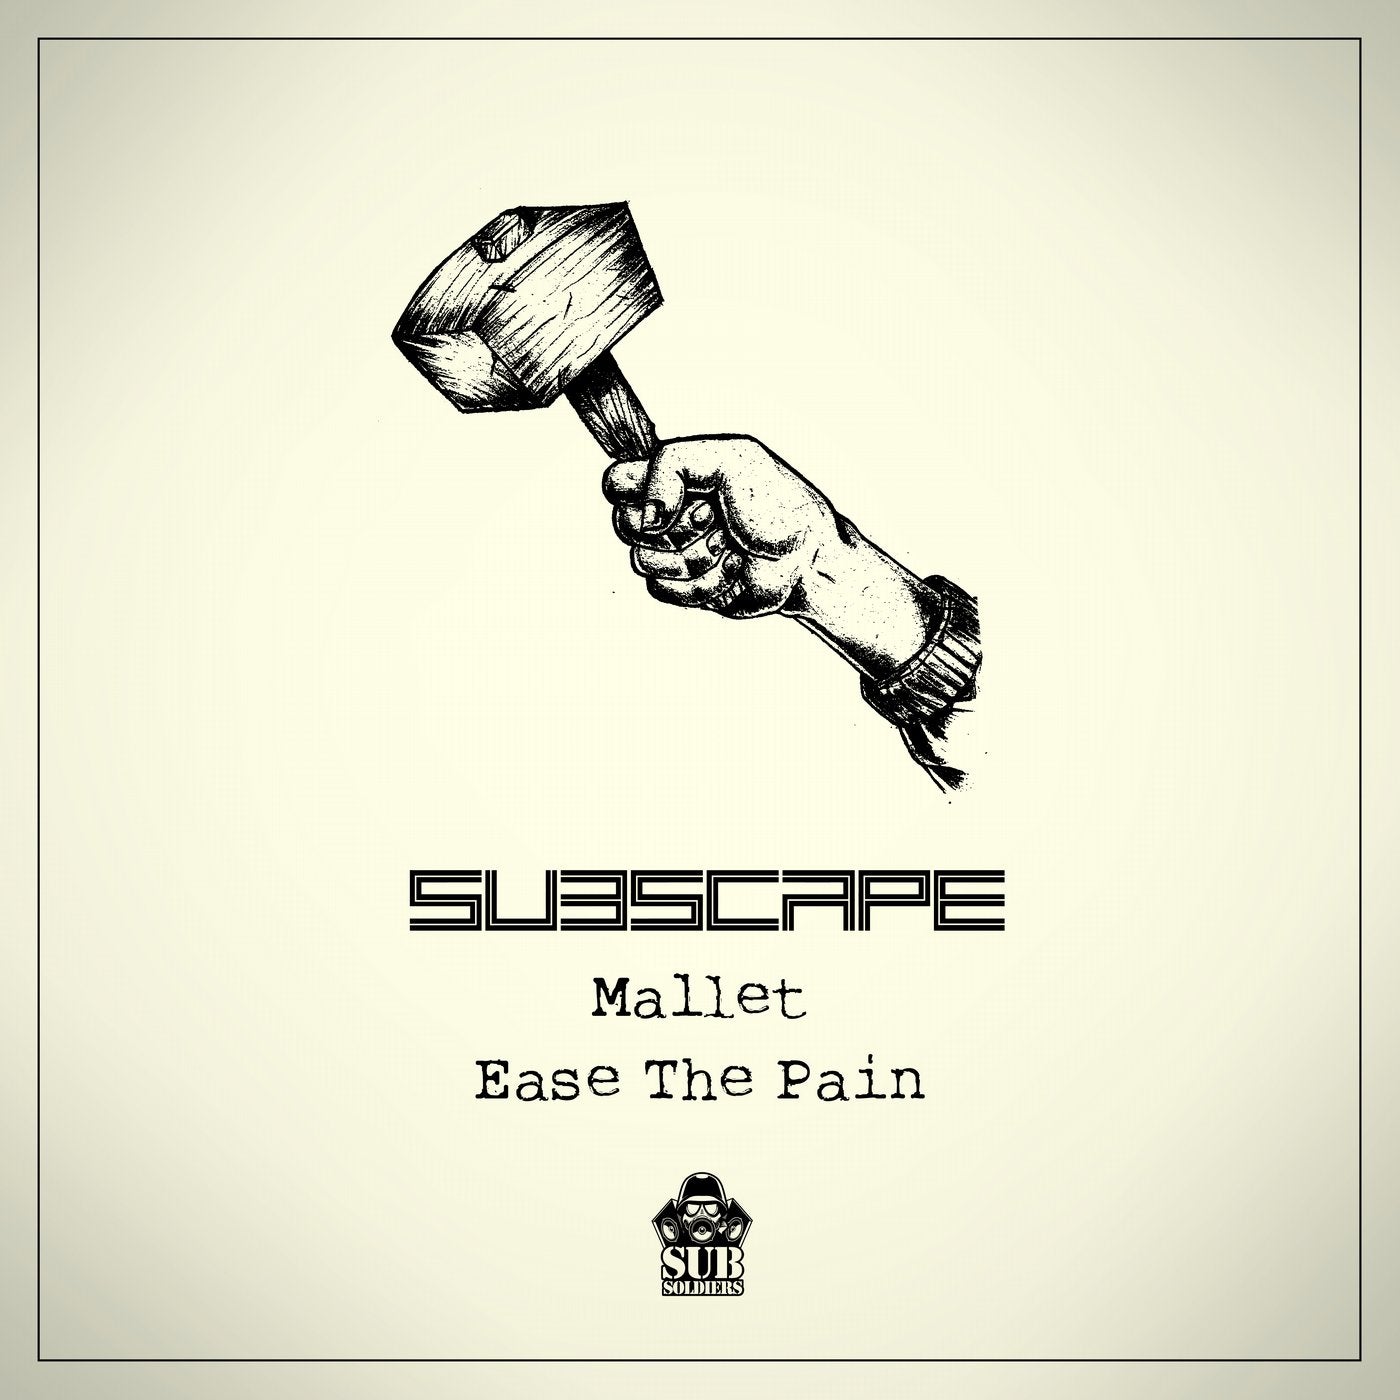 Mallet / Ease The Pain